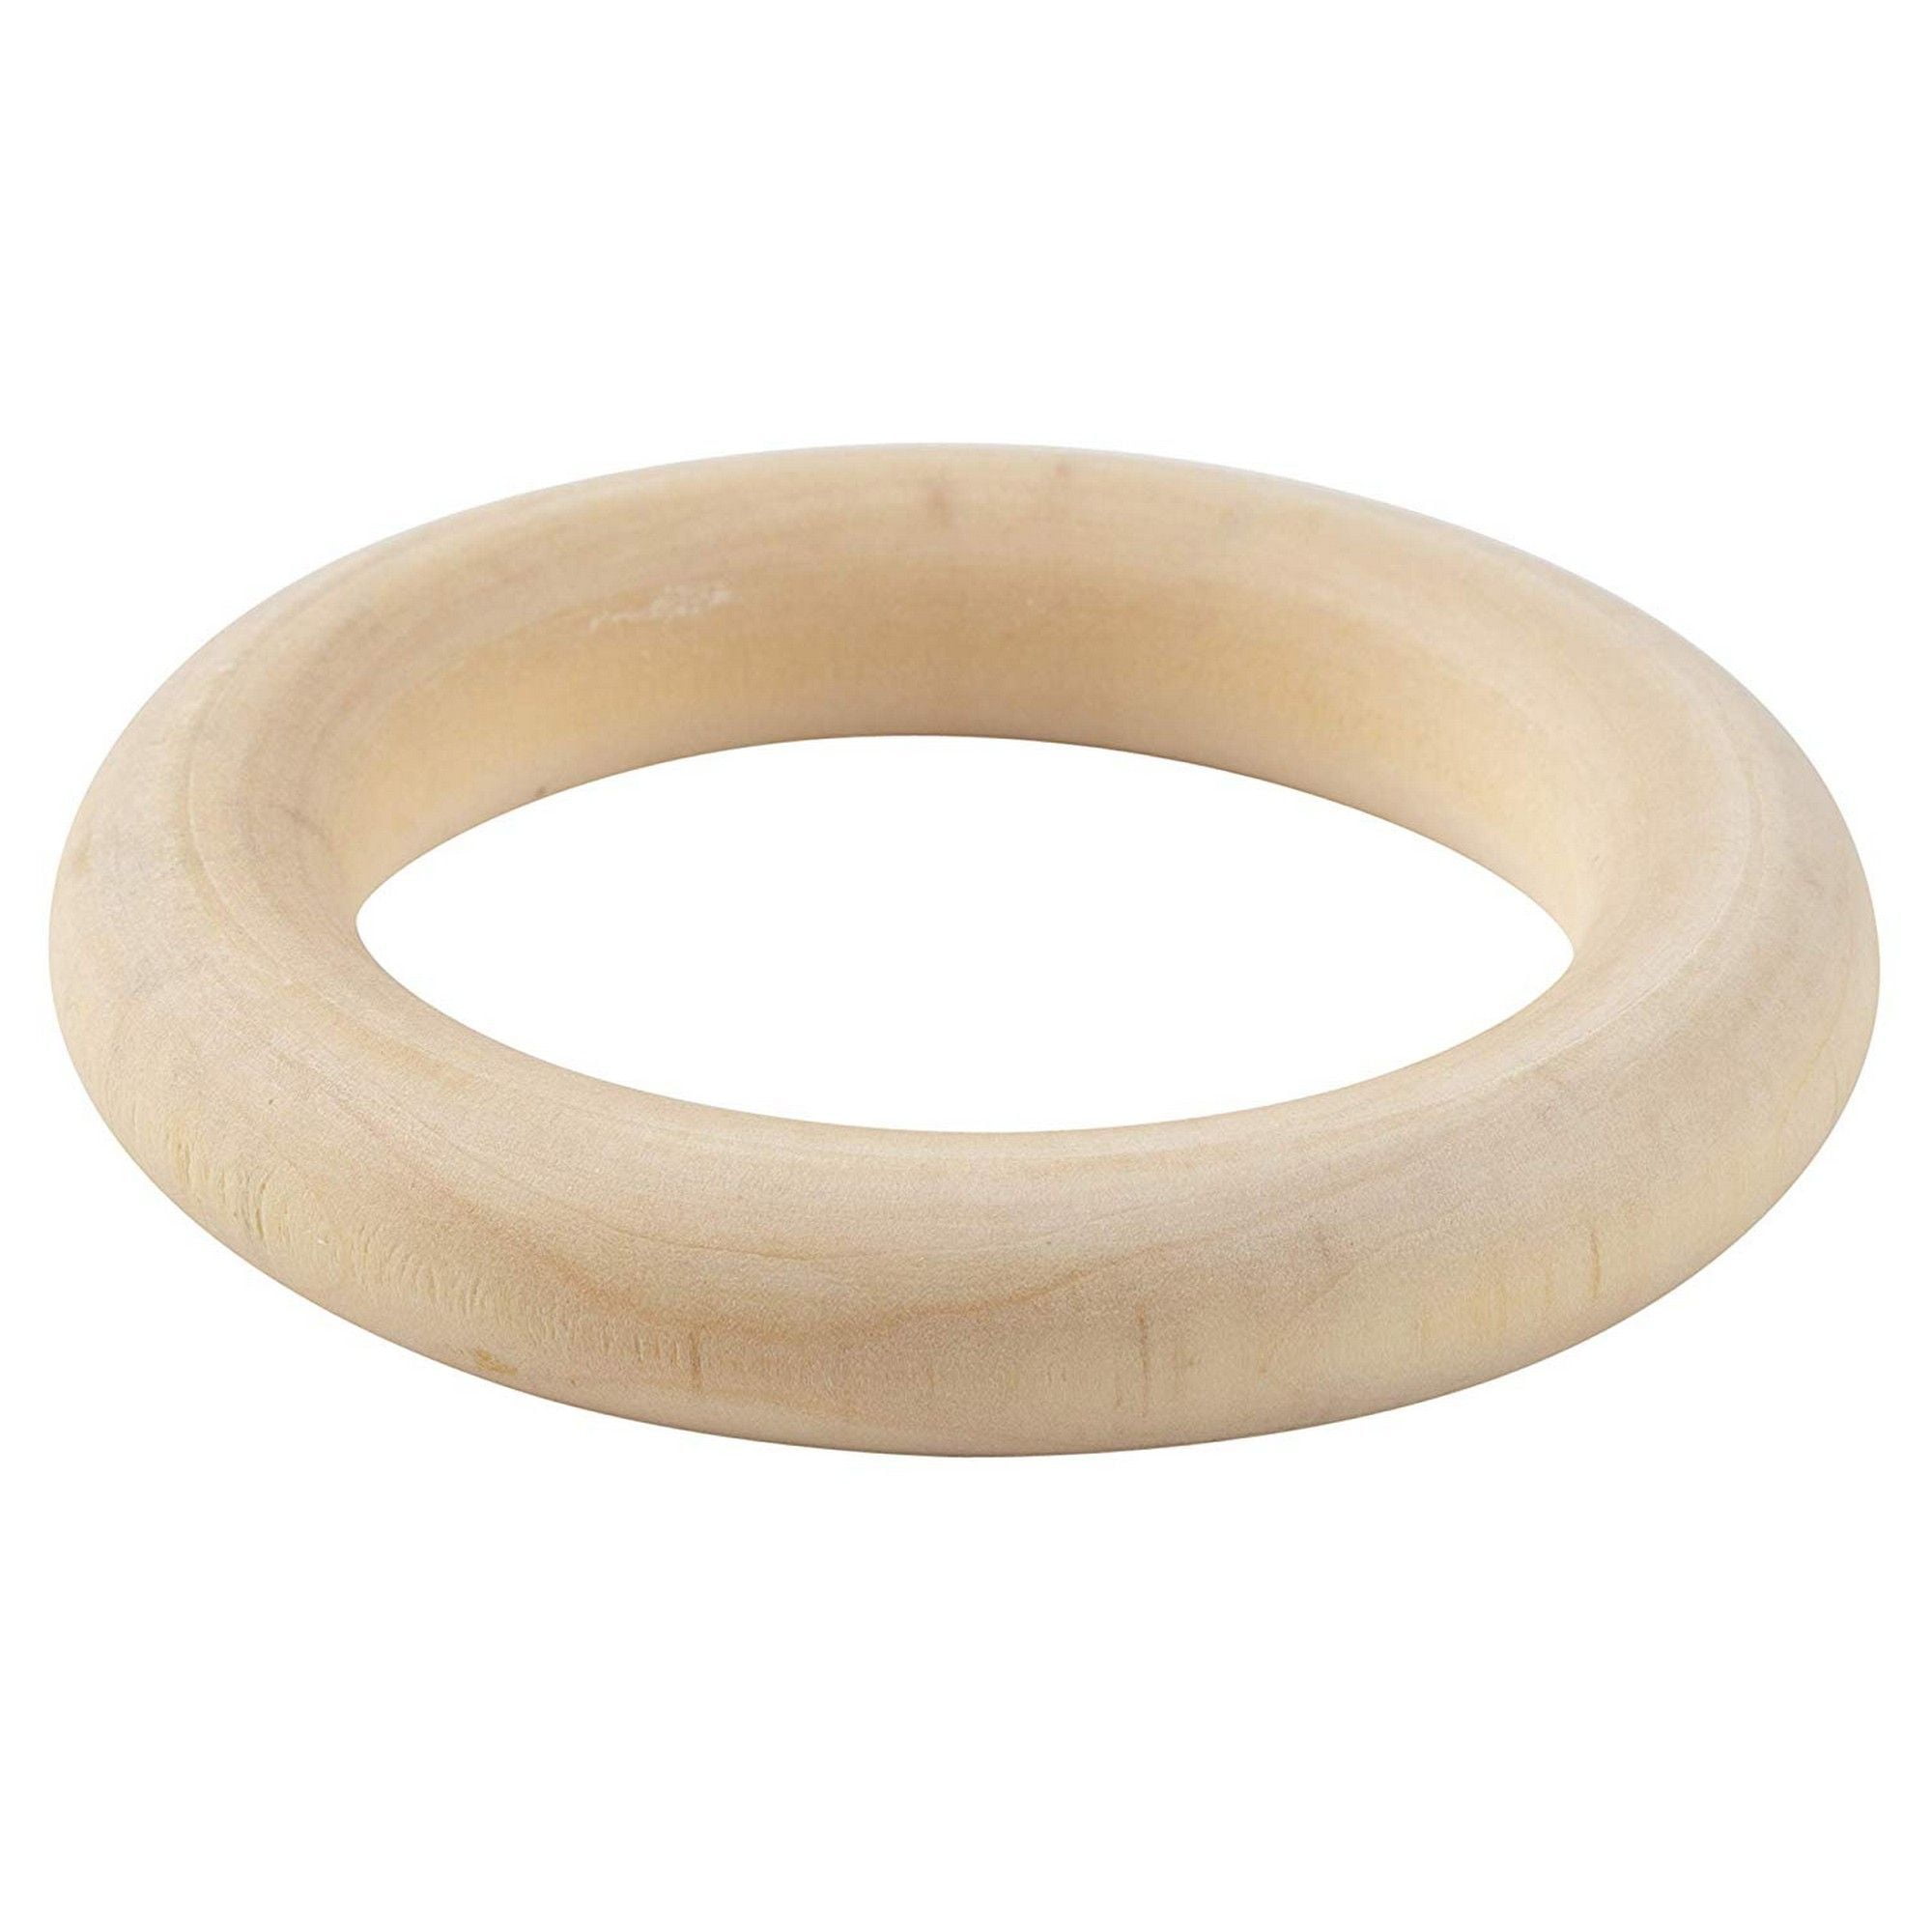 large wooden craft rings